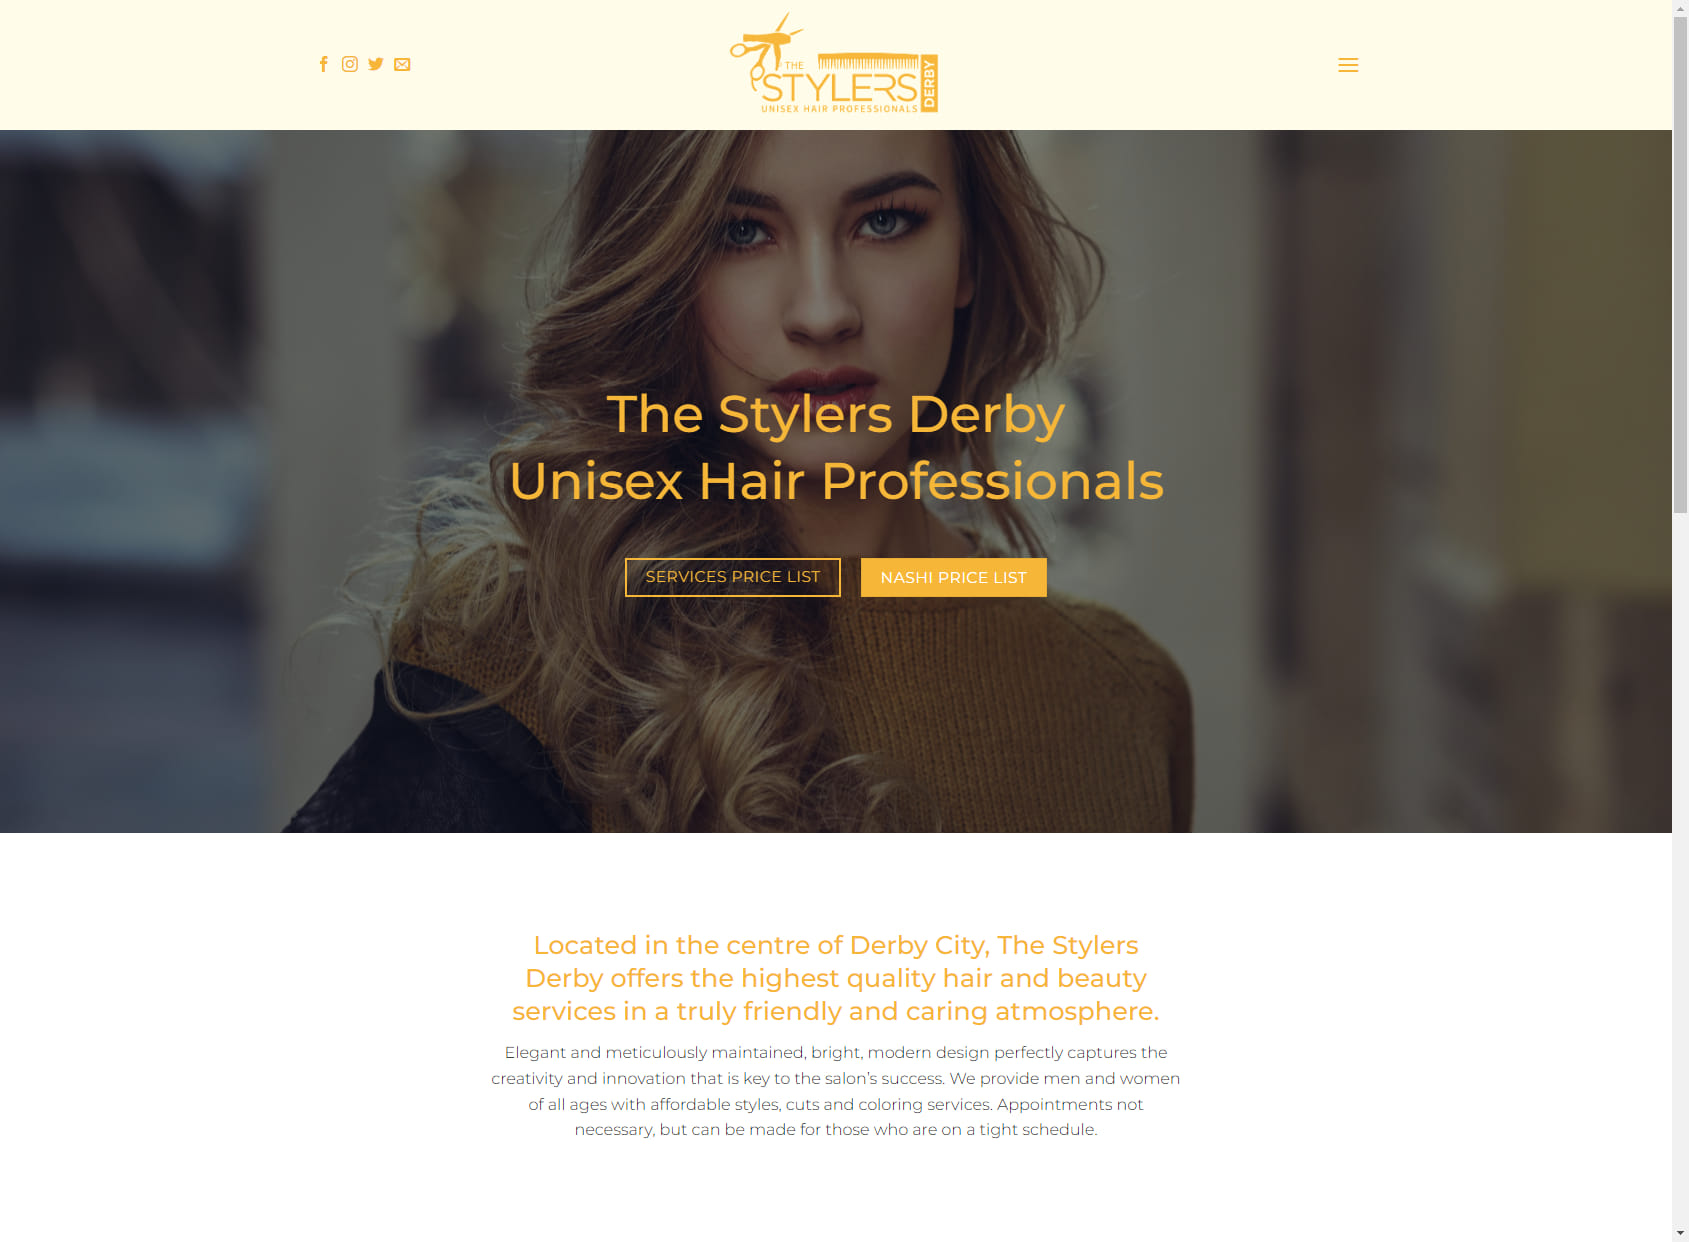 The Stylers Derby